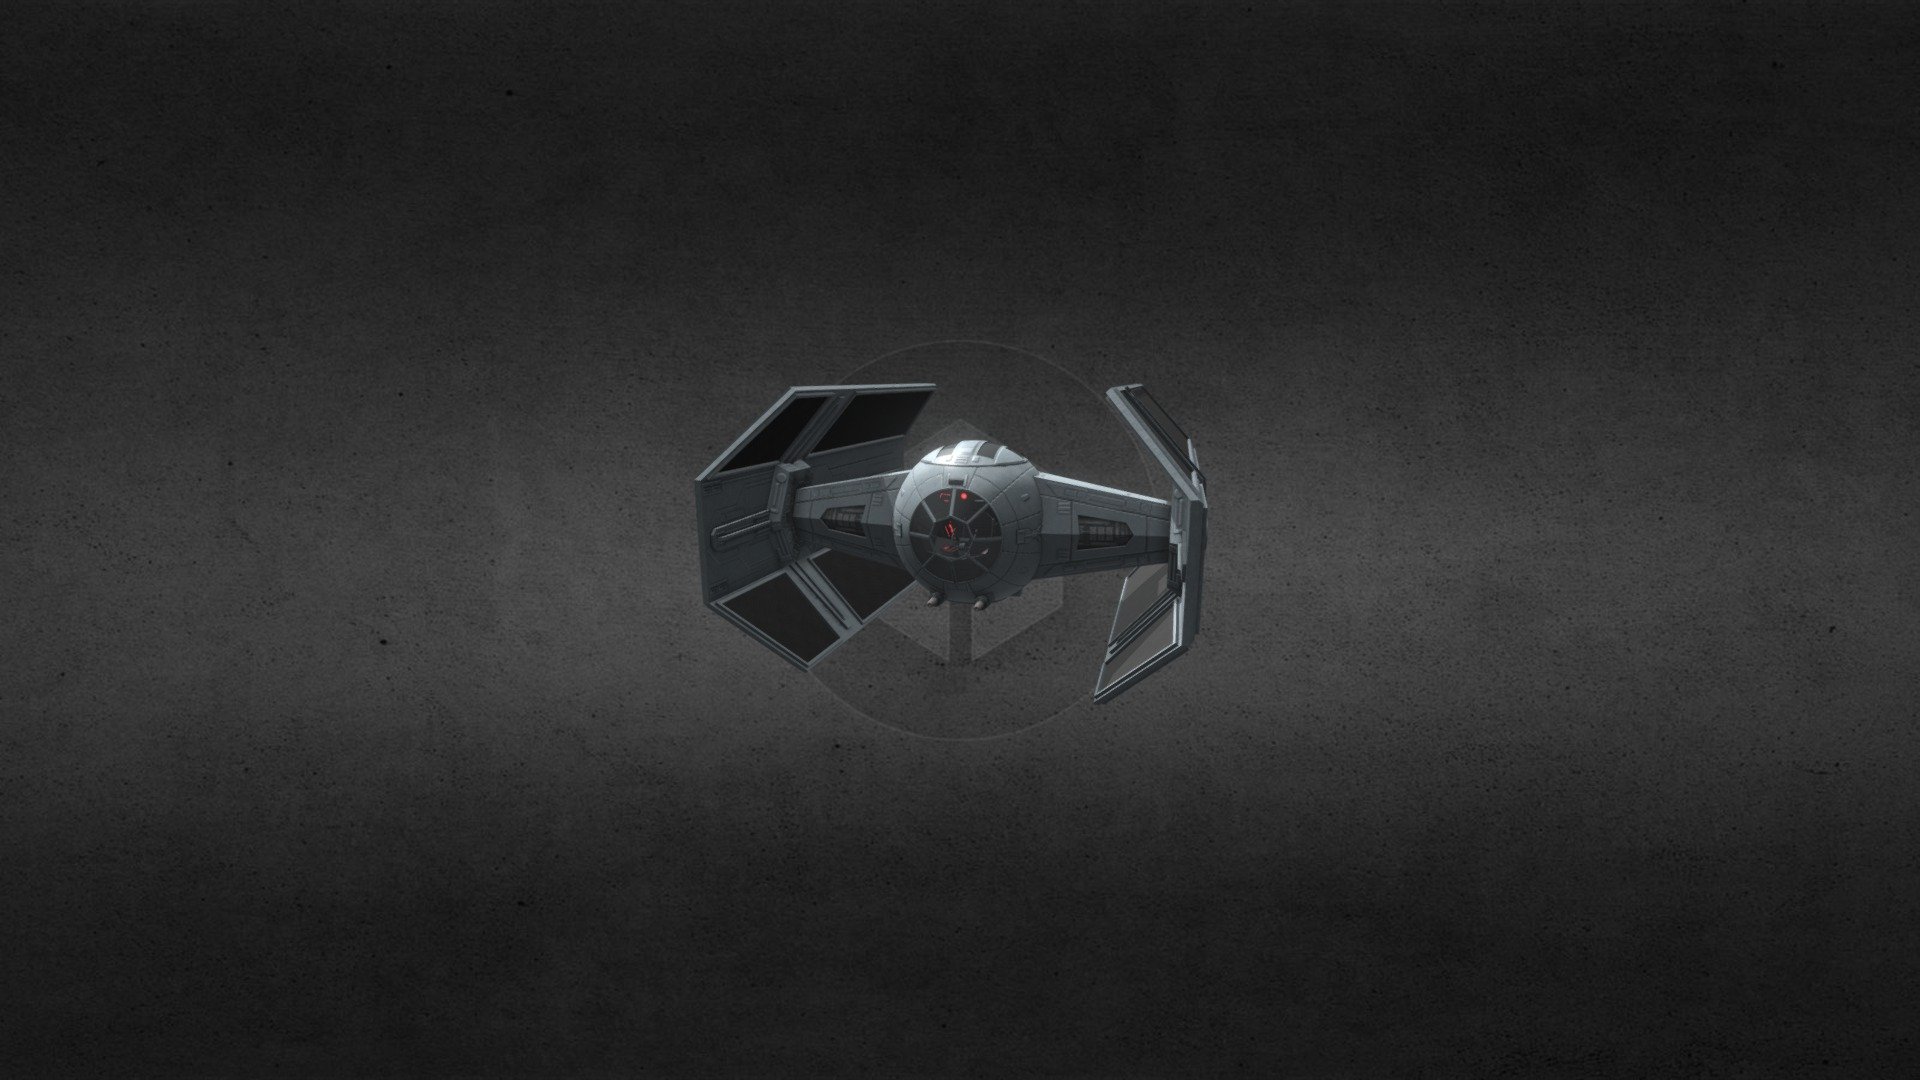 TIE Advanced Model made for Gmod. You can use it as a flyable vehicle ingame.

In designing the starfighters of its TIE line, Sienar Fleet Systems drew heavily on the designs of Kuat Systems Engineering ships such as the V-wing and Eta-2 interceptor. Sienar also experimented with advanced models featuring localized improvements and secret technological breakthroughs, including the TIE Advanced v1 prototype, based on Sienar's Scimitar Star Courier. This prototype led to the TIE Advanced x1, which boasted a hyperdrive and deflector shield generator. A modified early prototype of the Advanced x1 line was flown by Darth Vader himself. Vader's fighter boasted greater speed and heavier firepower, featuring fixed-mounted twin blaster cannons and a cluster missile launcher. Vader specified a custom cockpit to accommodate his armored suit, and high-performance solar cells were fitted into the fighter's curved wings 3d model